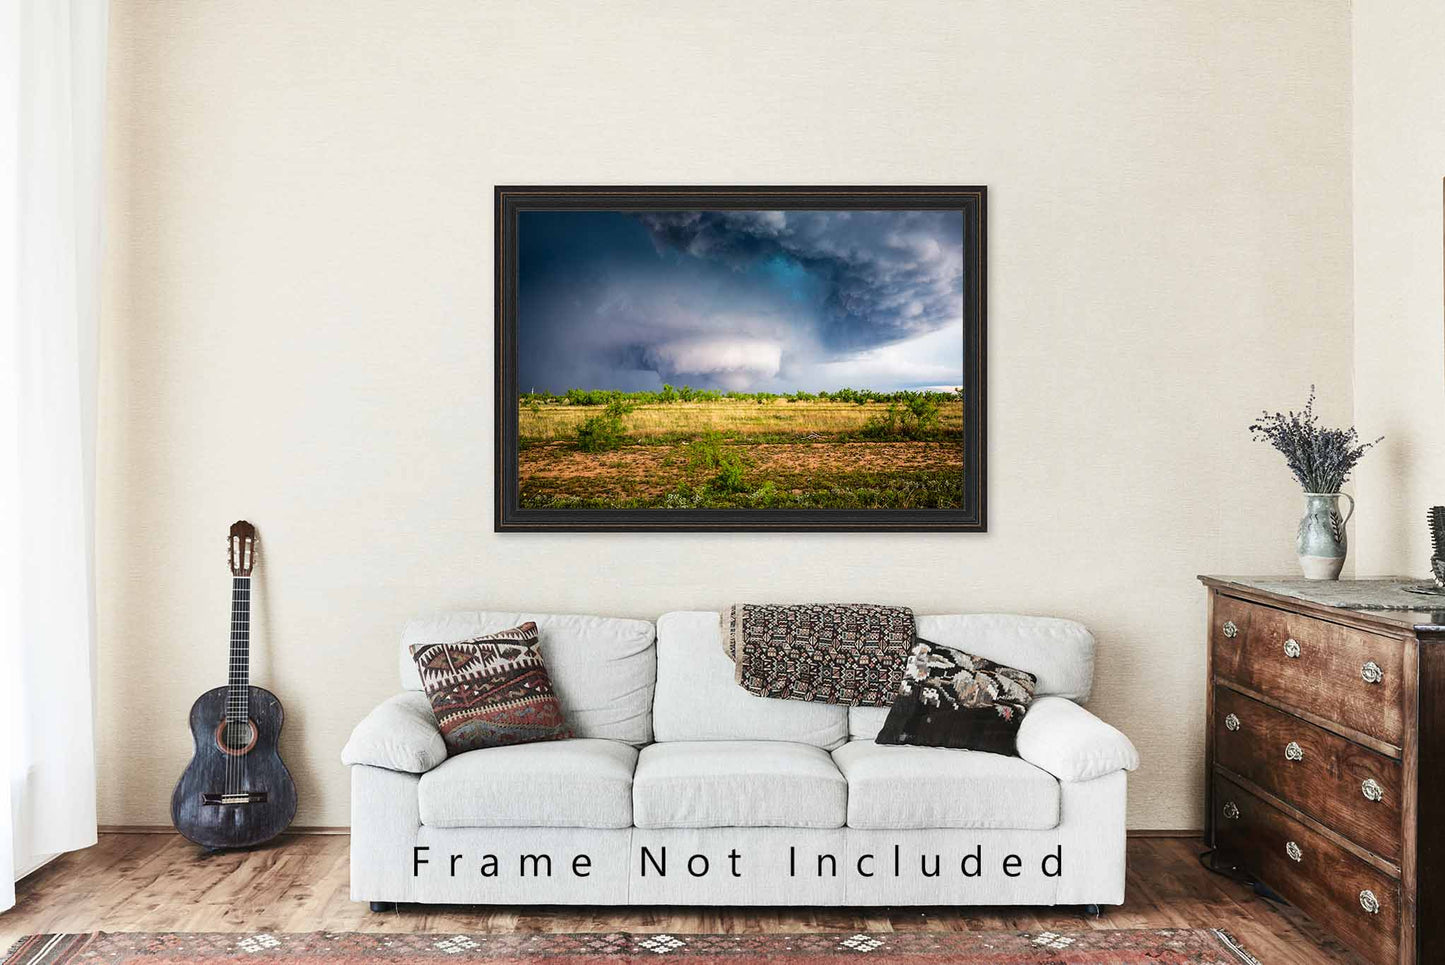 Storm Photography Print - Picture of Tornado on Spring Day in West Texas - Extreme Weather Wall Art Nature Cloud Photo Artwork Decor